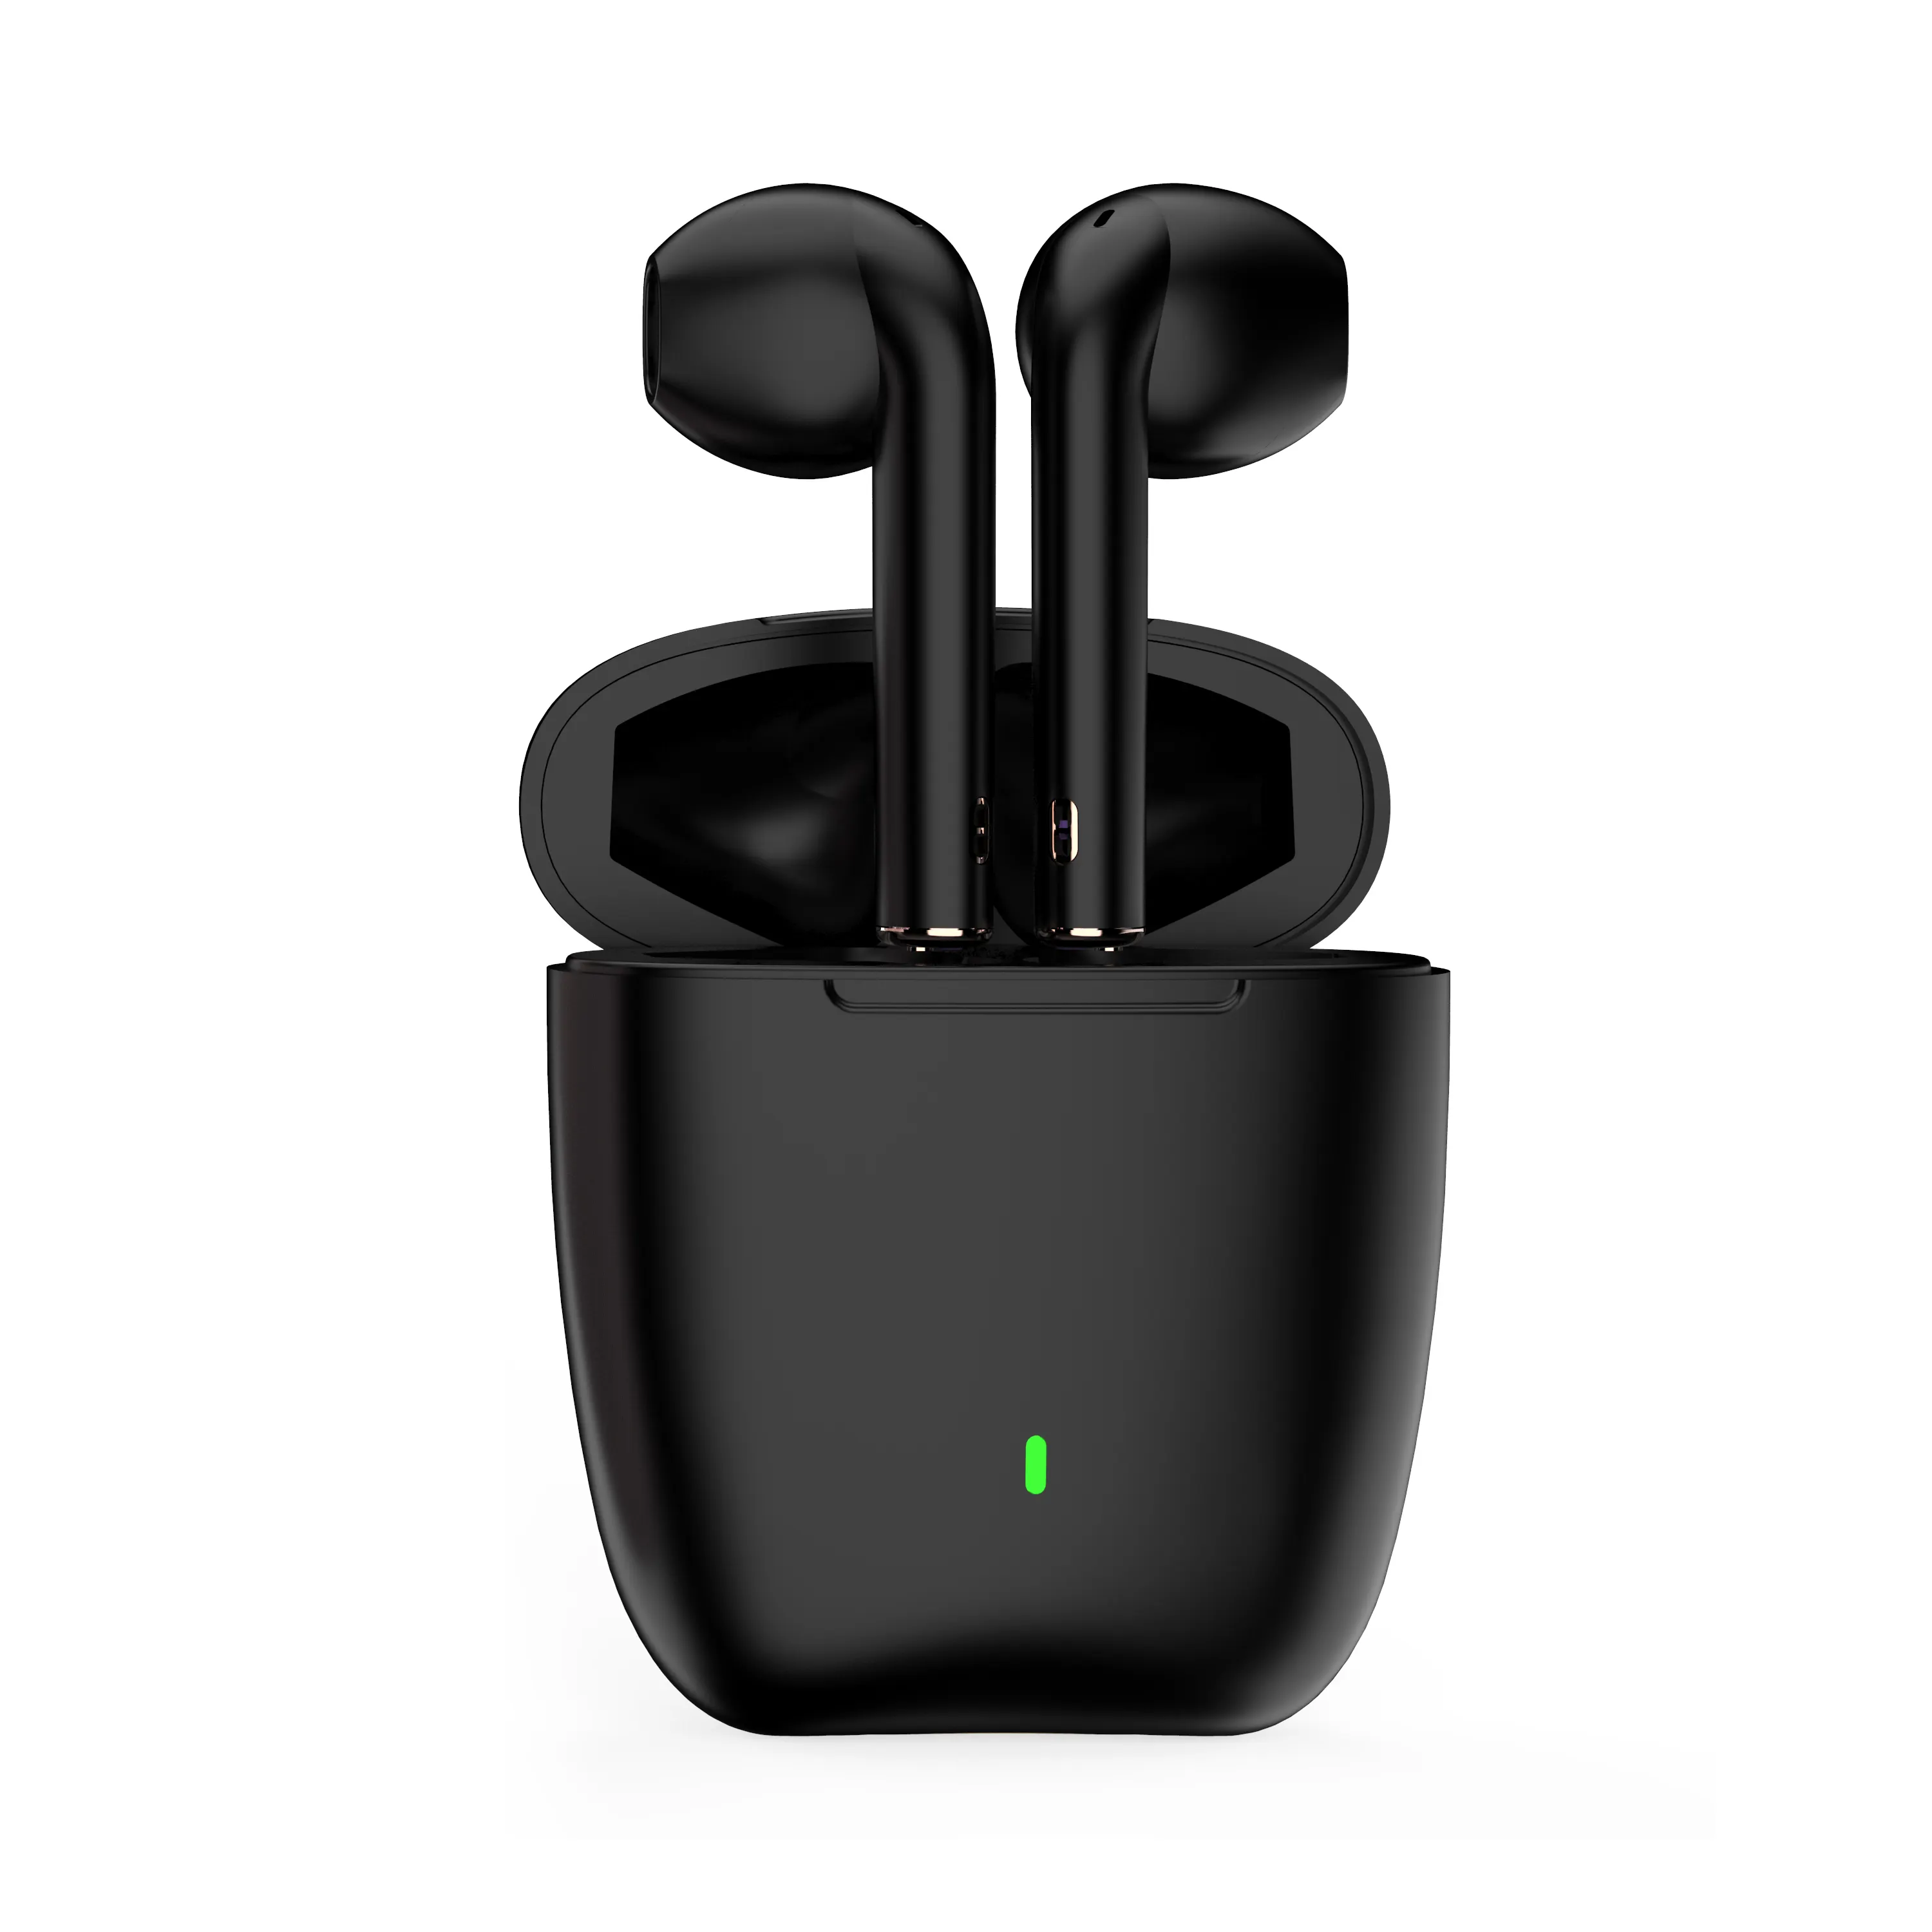 Truly Wireless Earphones BT 5.0 Usb Type C For Android Sports Work Out Airplane Stereo Hifi Sound Quality Earbuds